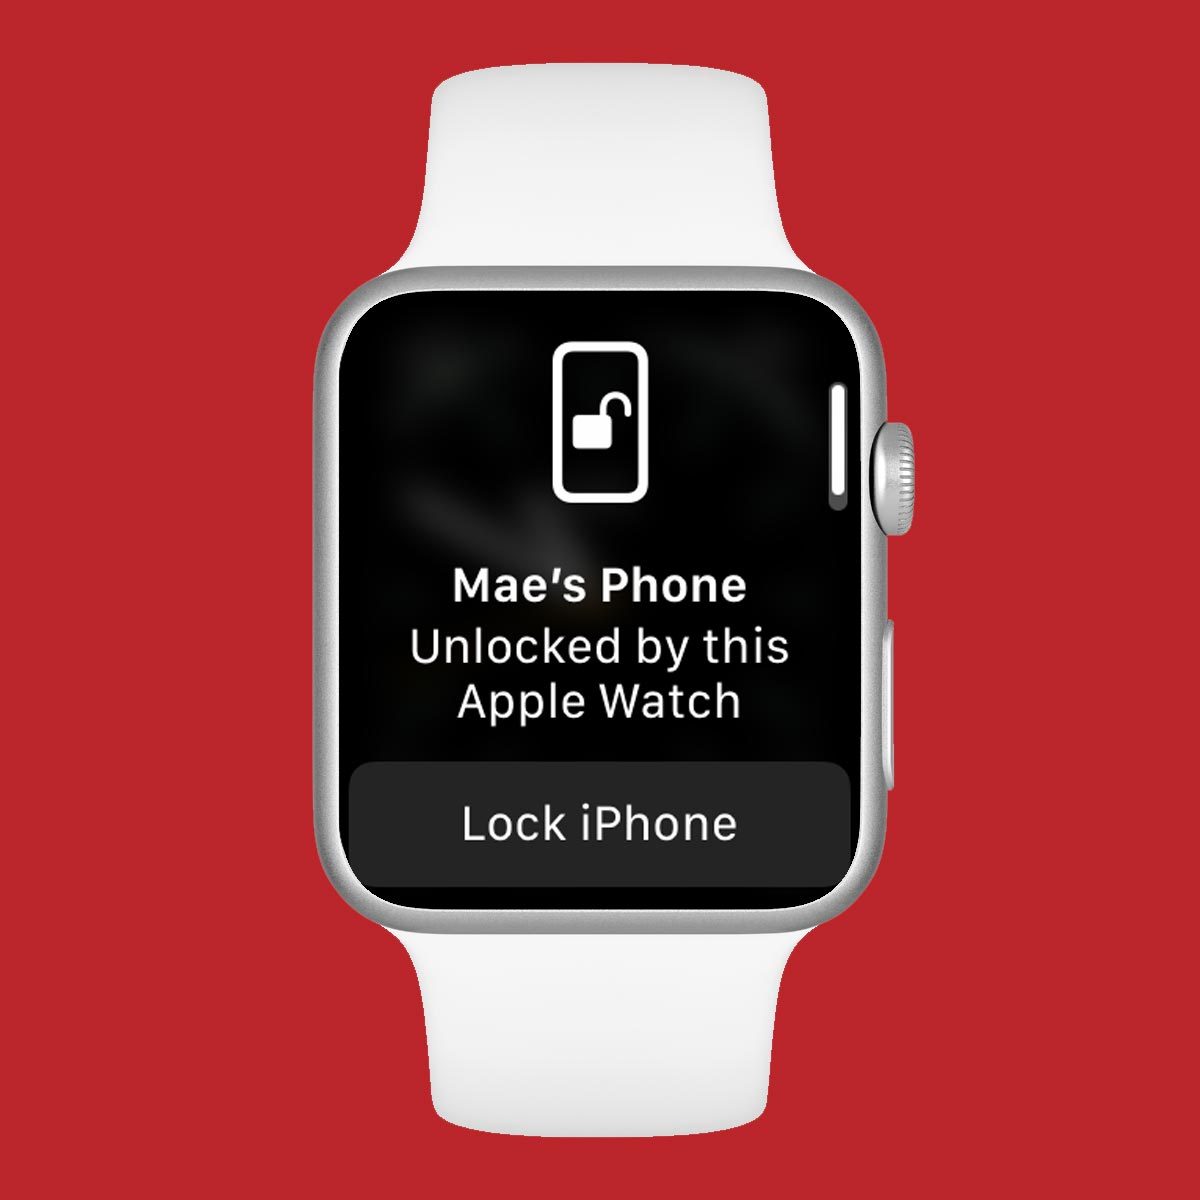 https://www.rd.com/wp-content/uploads/2020/07/16-Hidden-Apple-Watch-Features-You-Must-Know-About_unlock_2.jpg?fit=700%2C700